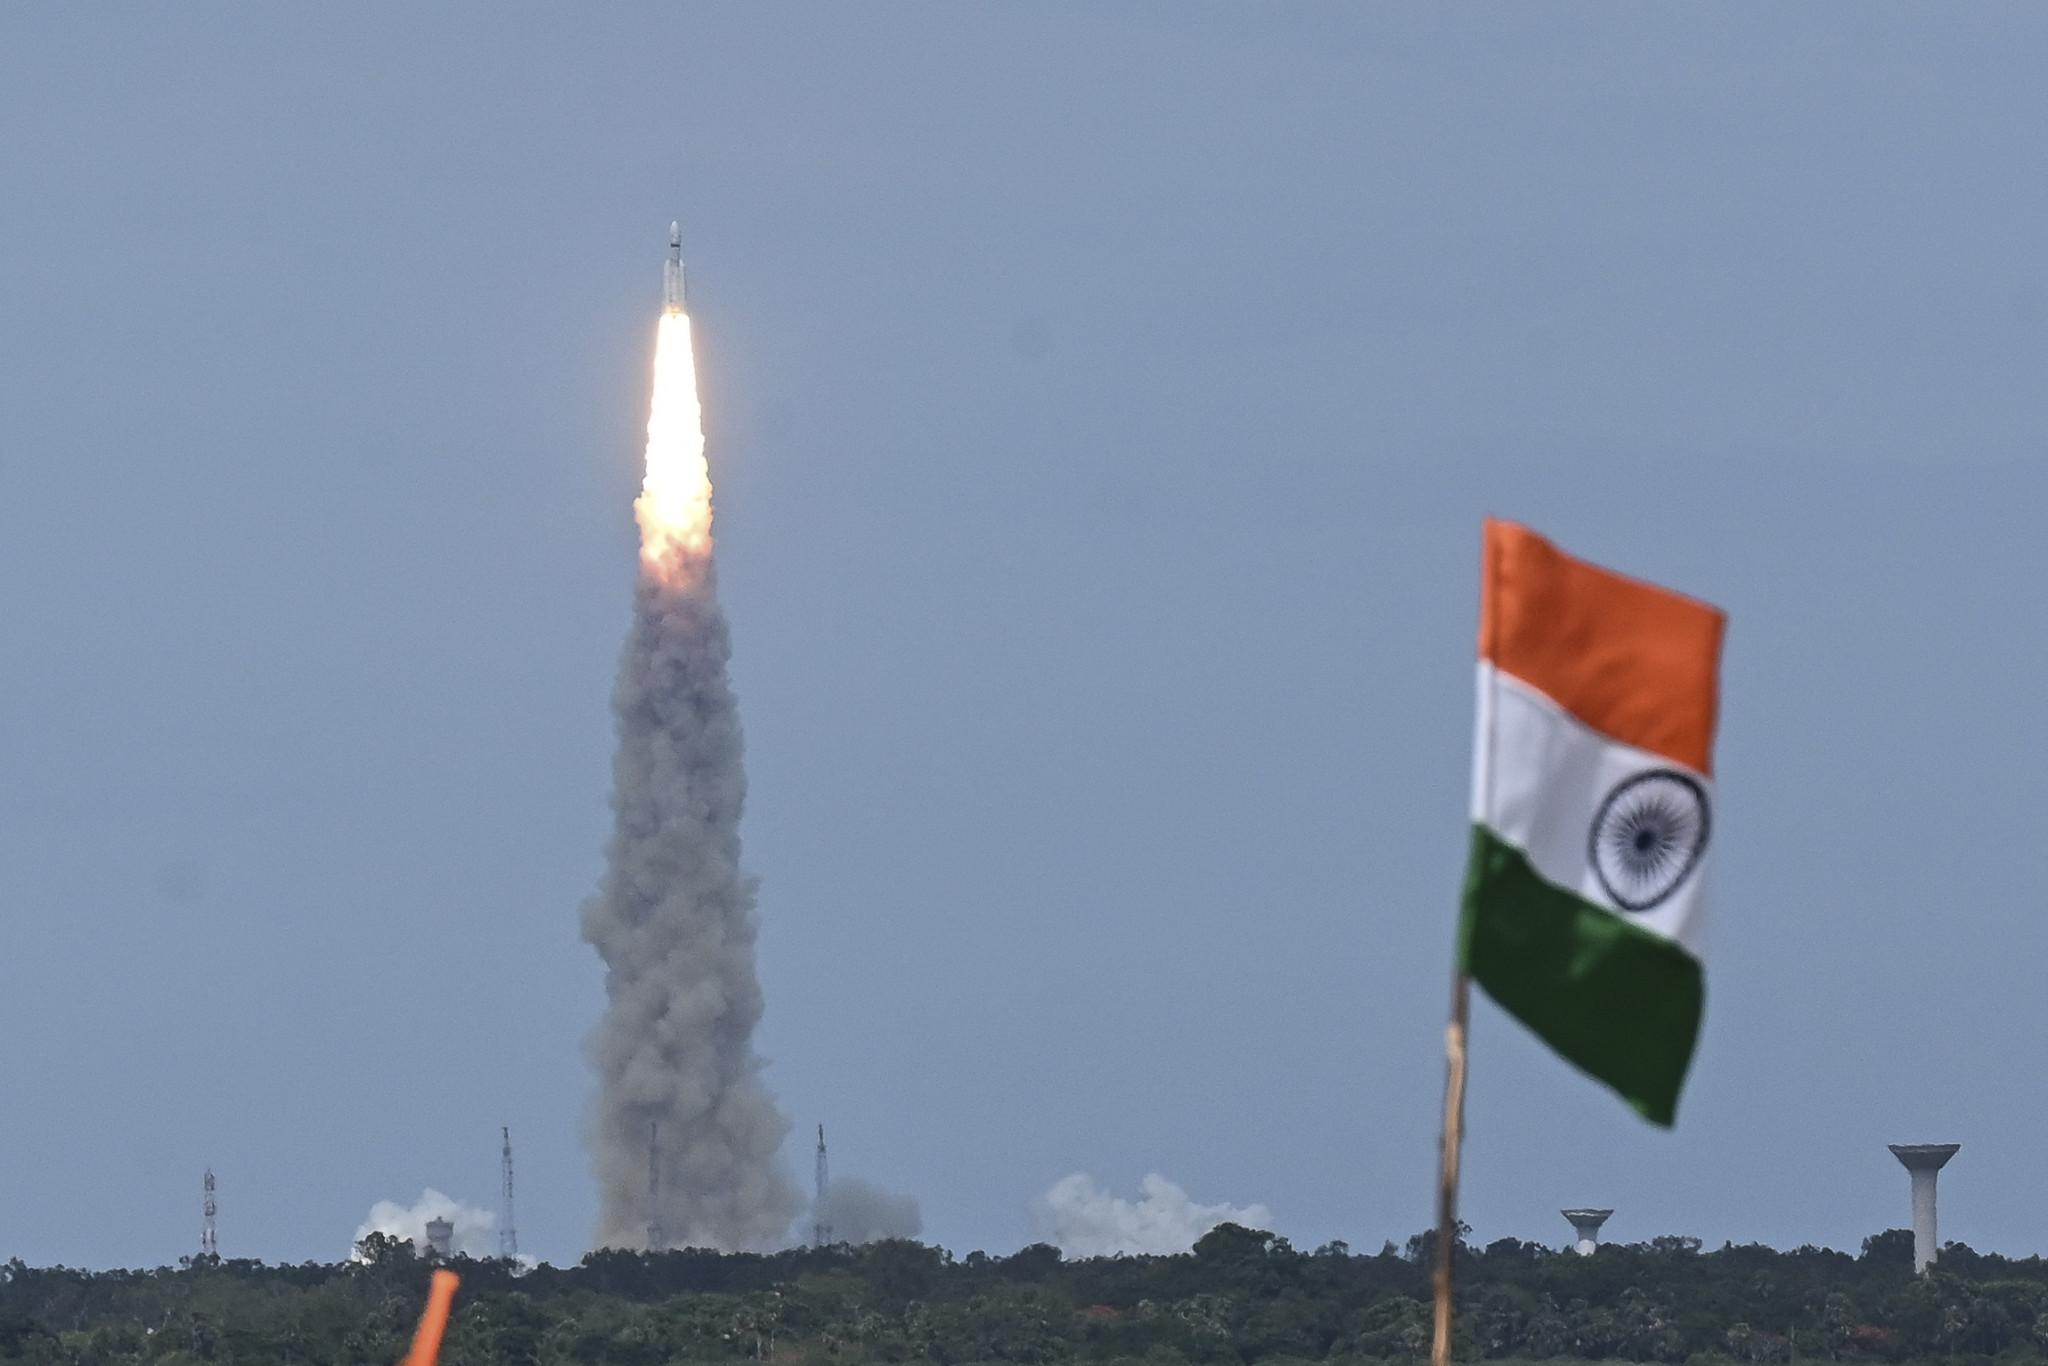 India became the first nation to land a craft near the Moon's south pole thanks to the Indian Space Research Organisation rocket named Chandrayaan-3, the sort of feat that makes the world sit up and take notice ©Getty Images